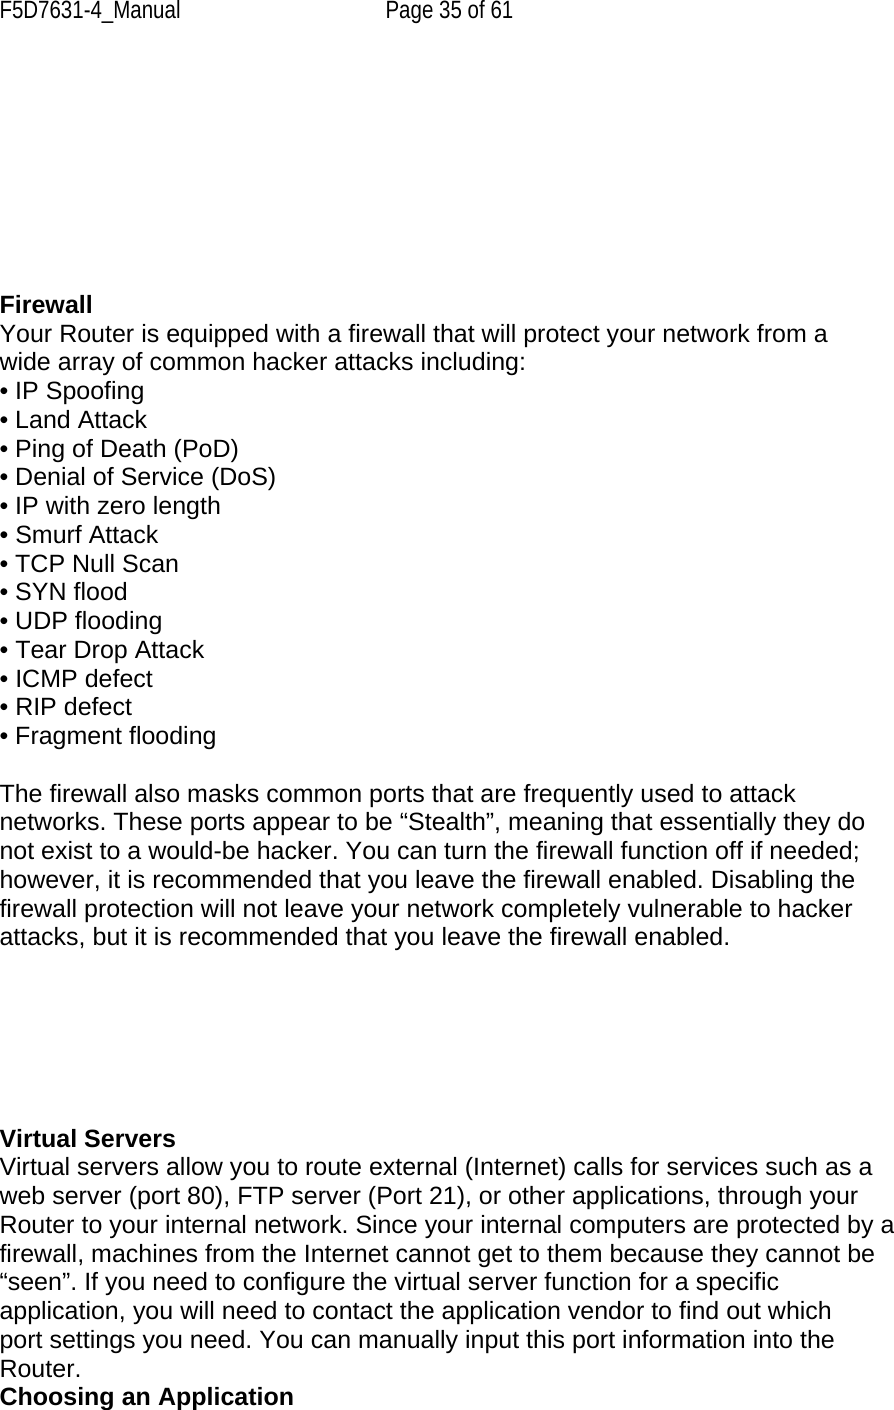 F5D7631-4_Manual  Page 35 of 61         Firewall Your Router is equipped with a firewall that will protect your network from a wide array of common hacker attacks including: • IP Spoofing • Land Attack • Ping of Death (PoD) • Denial of Service (DoS) • IP with zero length • Smurf Attack • TCP Null Scan • SYN flood • UDP flooding • Tear Drop Attack • ICMP defect • RIP defect • Fragment flooding  The firewall also masks common ports that are frequently used to attack networks. These ports appear to be “Stealth”, meaning that essentially they do not exist to a would-be hacker. You can turn the firewall function off if needed; however, it is recommended that you leave the firewall enabled. Disabling the firewall protection will not leave your network completely vulnerable to hacker attacks, but it is recommended that you leave the firewall enabled.       Virtual Servers Virtual servers allow you to route external (Internet) calls for services such as a web server (port 80), FTP server (Port 21), or other applications, through your Router to your internal network. Since your internal computers are protected by a firewall, machines from the Internet cannot get to them because they cannot be “seen”. If you need to configure the virtual server function for a specific application, you will need to contact the application vendor to find out which port settings you need. You can manually input this port information into the Router. Choosing an Application 